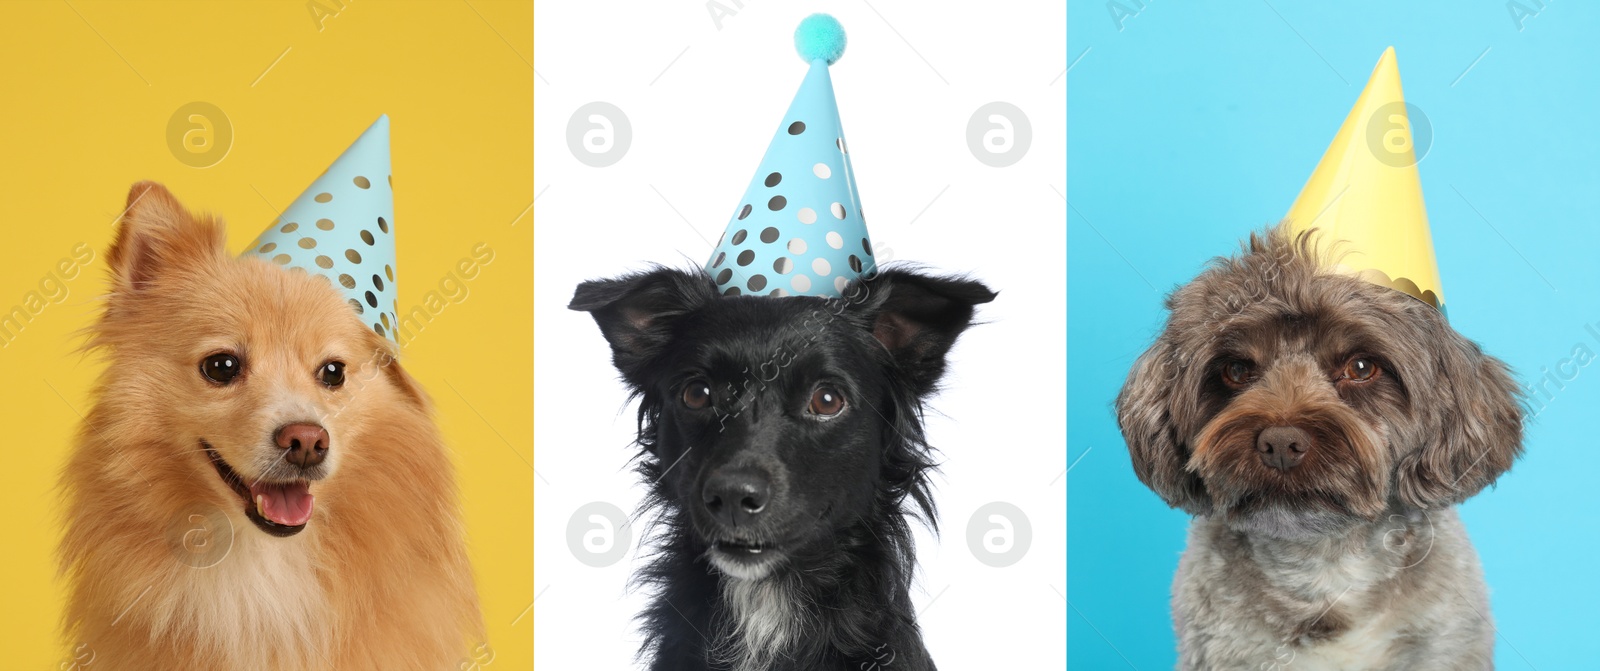 Image of Cute birthday dogs in party hats on different color backgrounds, collage of portraits